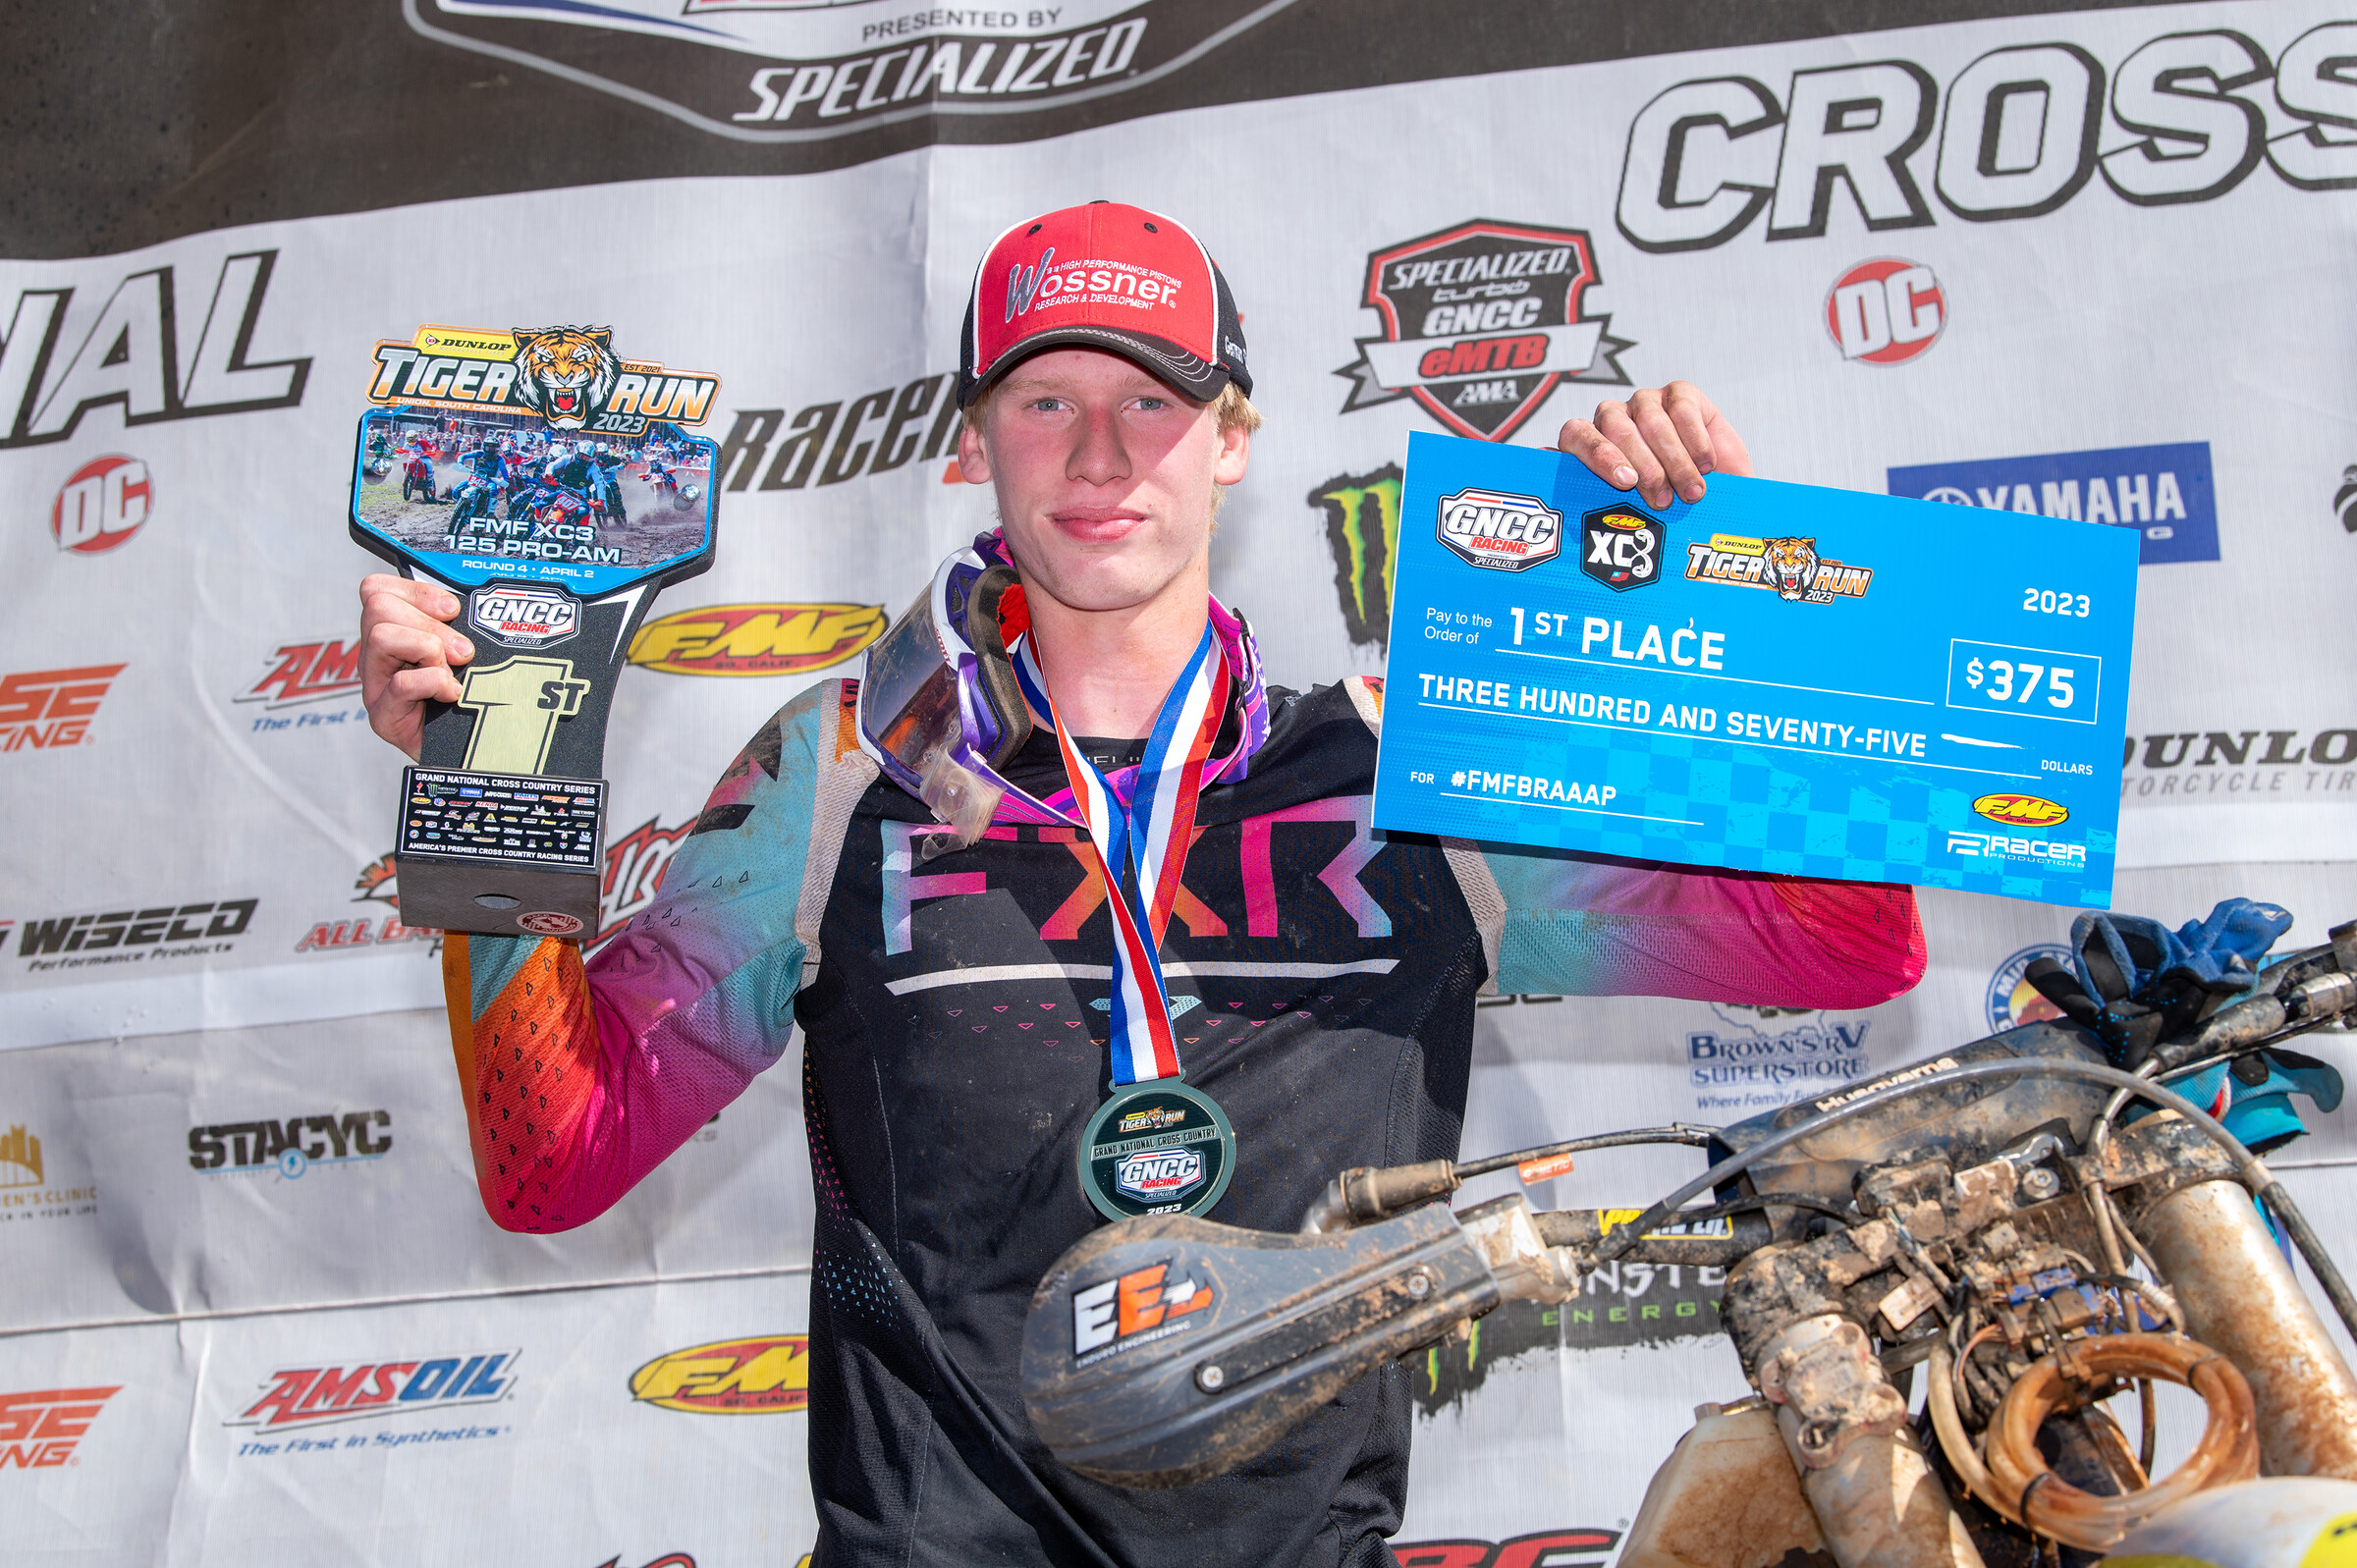 Toby Cleveland earned his third win of the season in the FMF XC3 class.